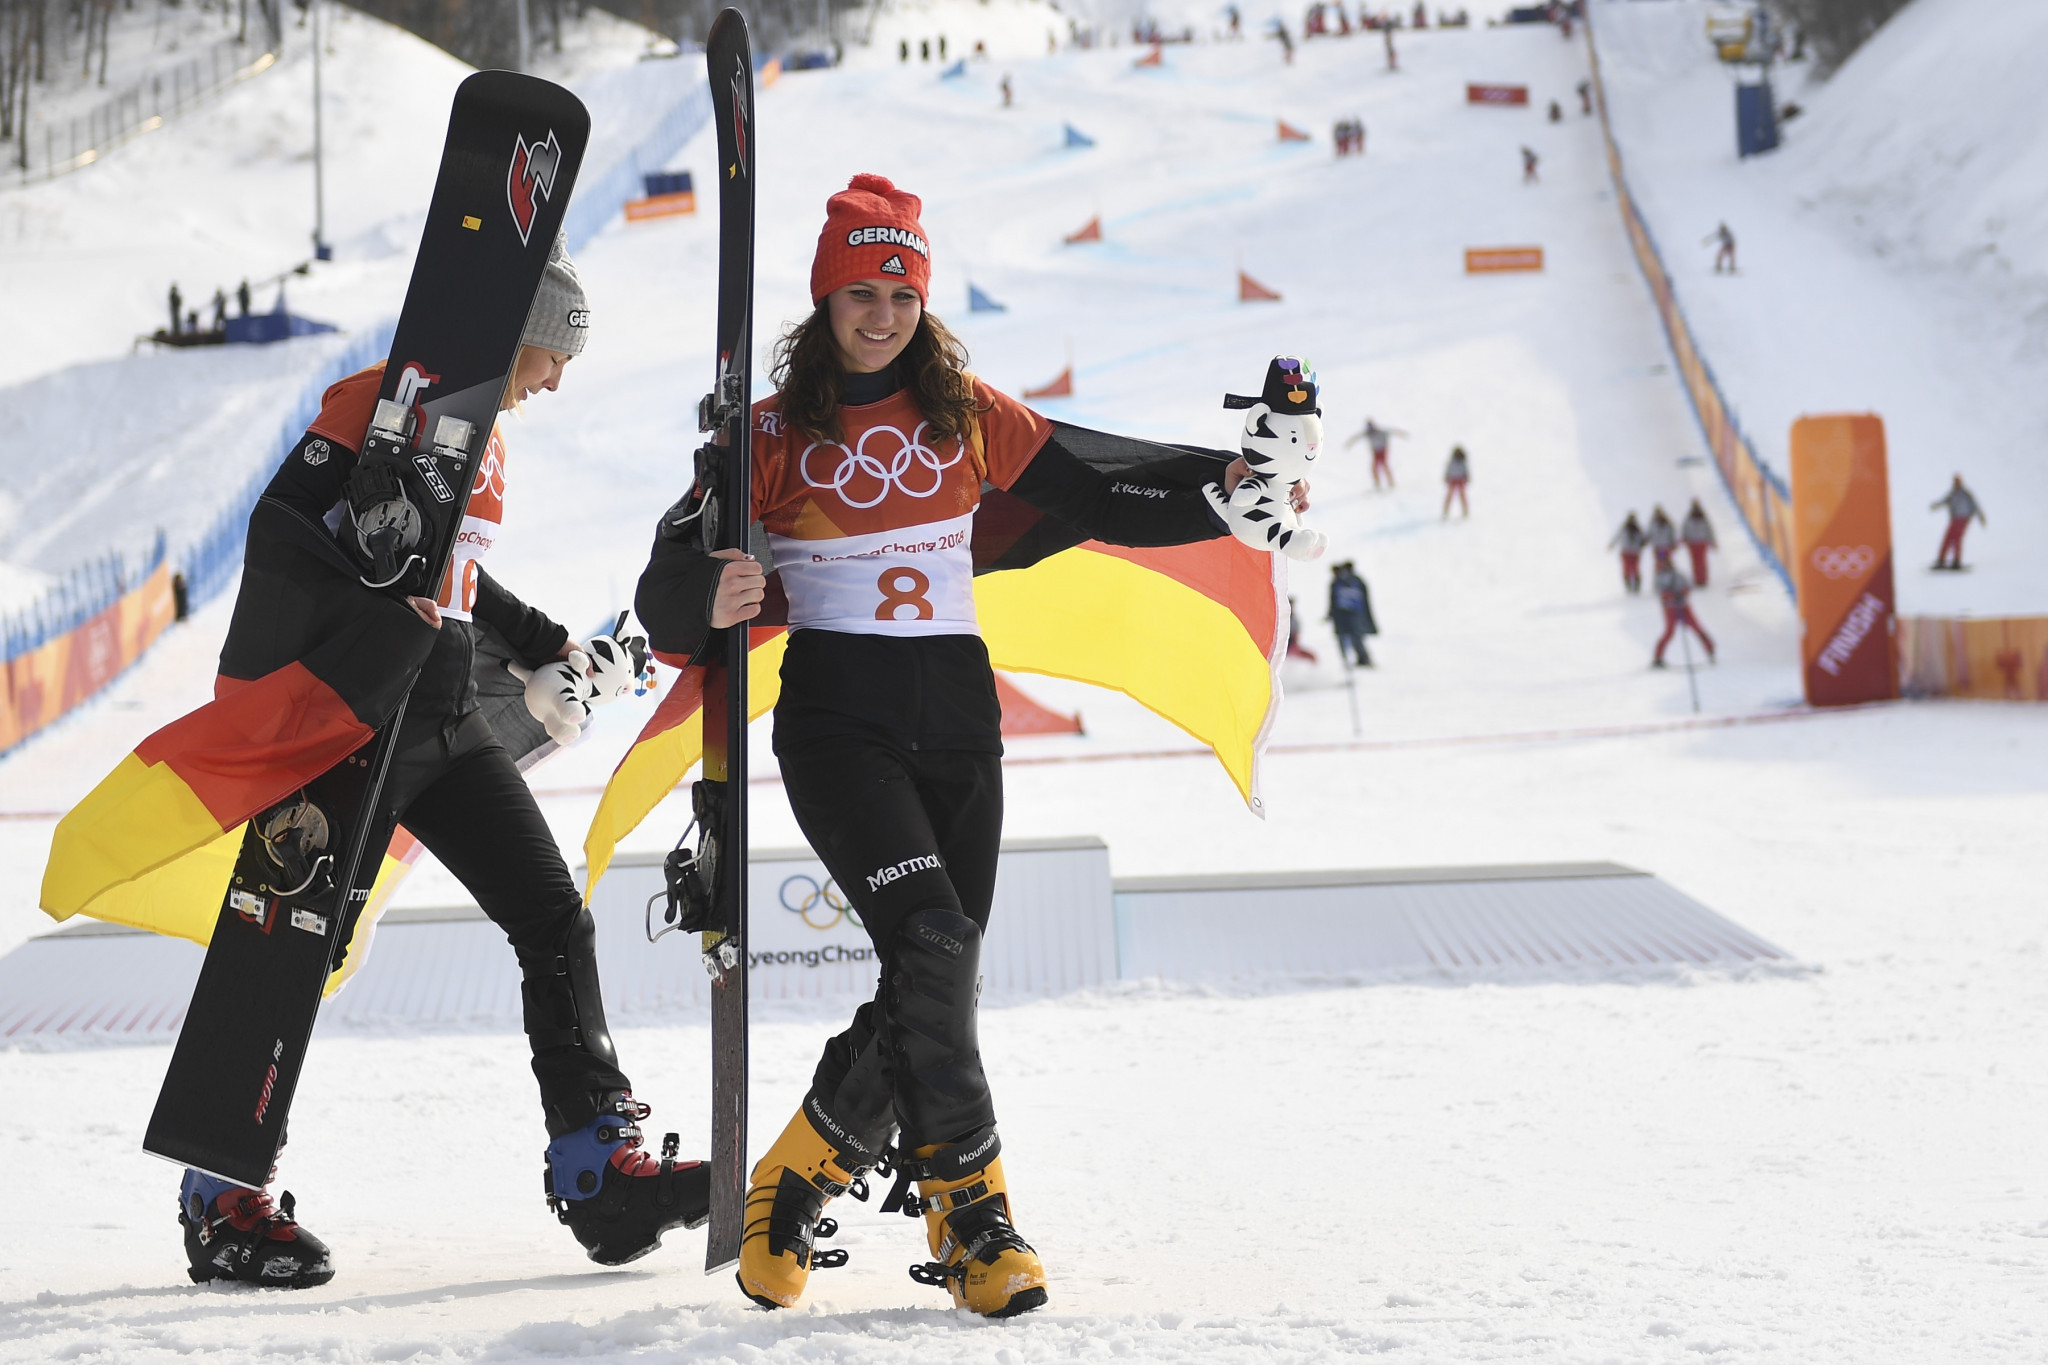 Snowboarding Germany President Michael Hölz doubts there will be fair play in China ©Getty Images